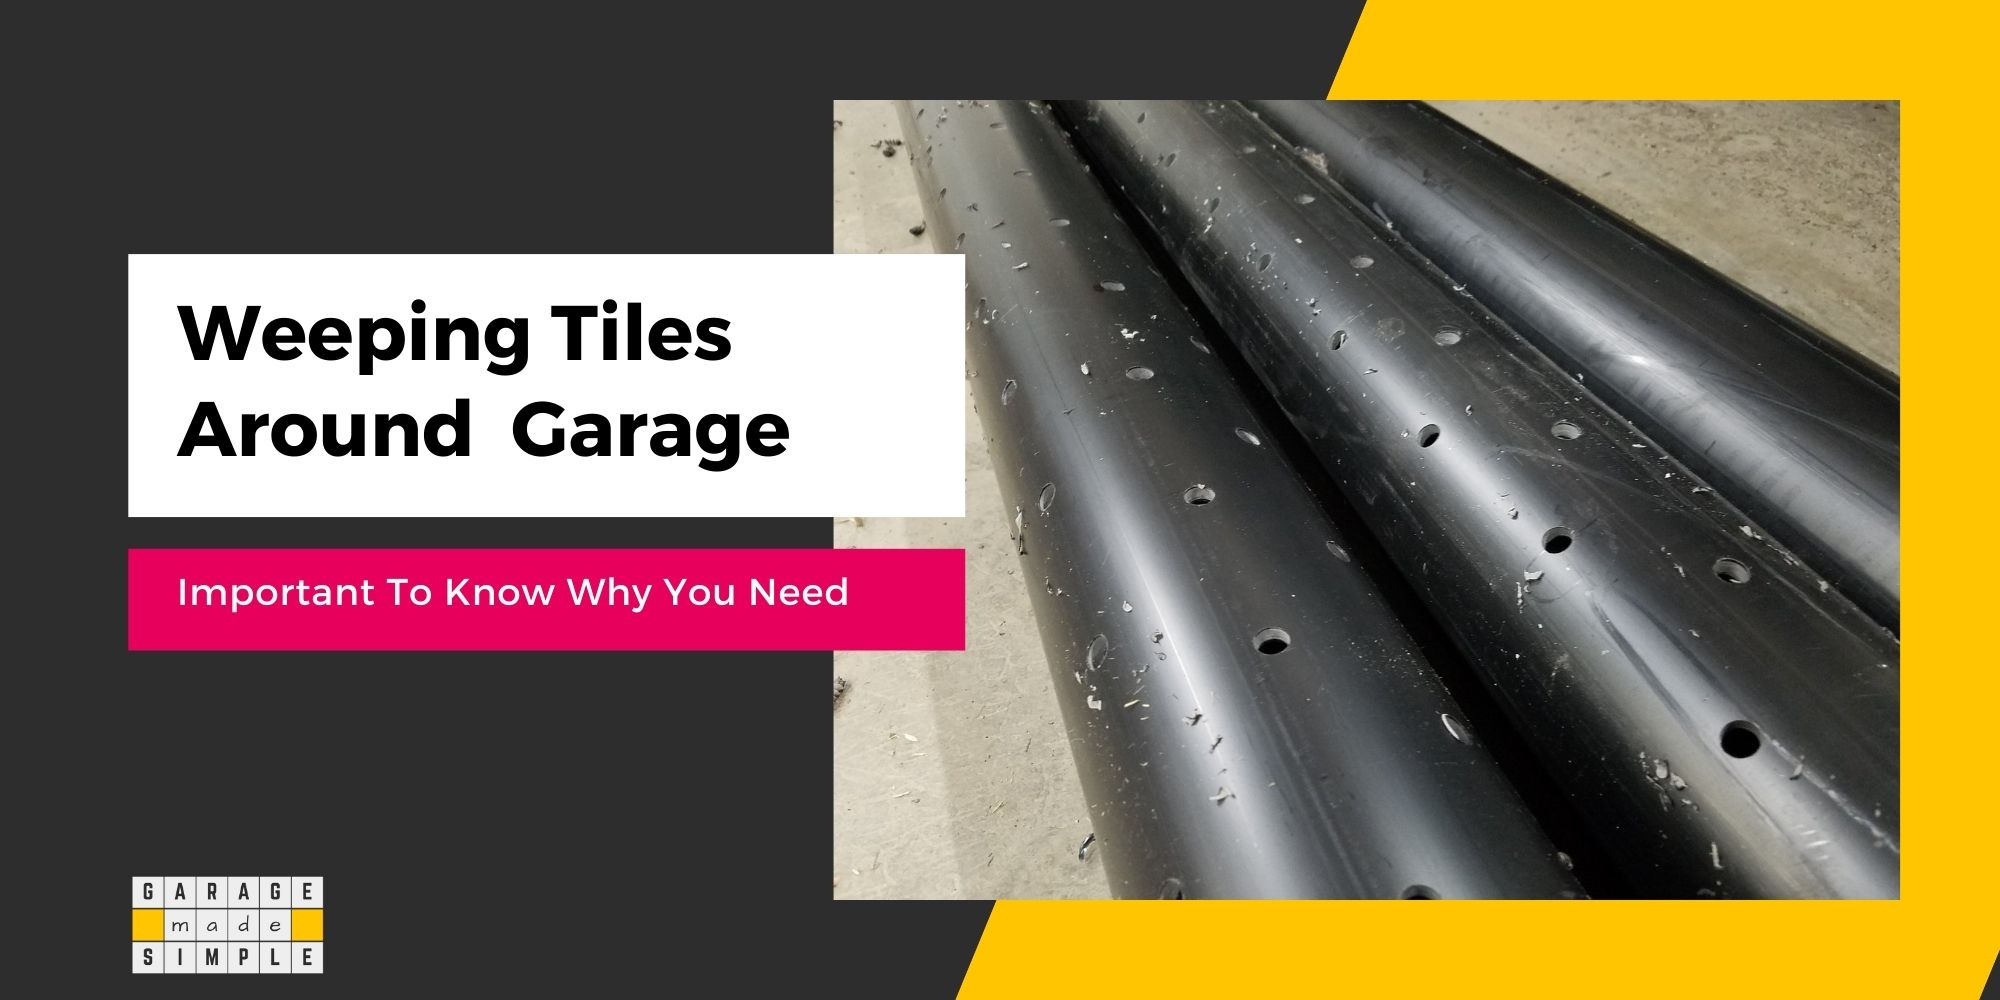 Why Do You Need Weeping Tile Around The Garage? (Important!)